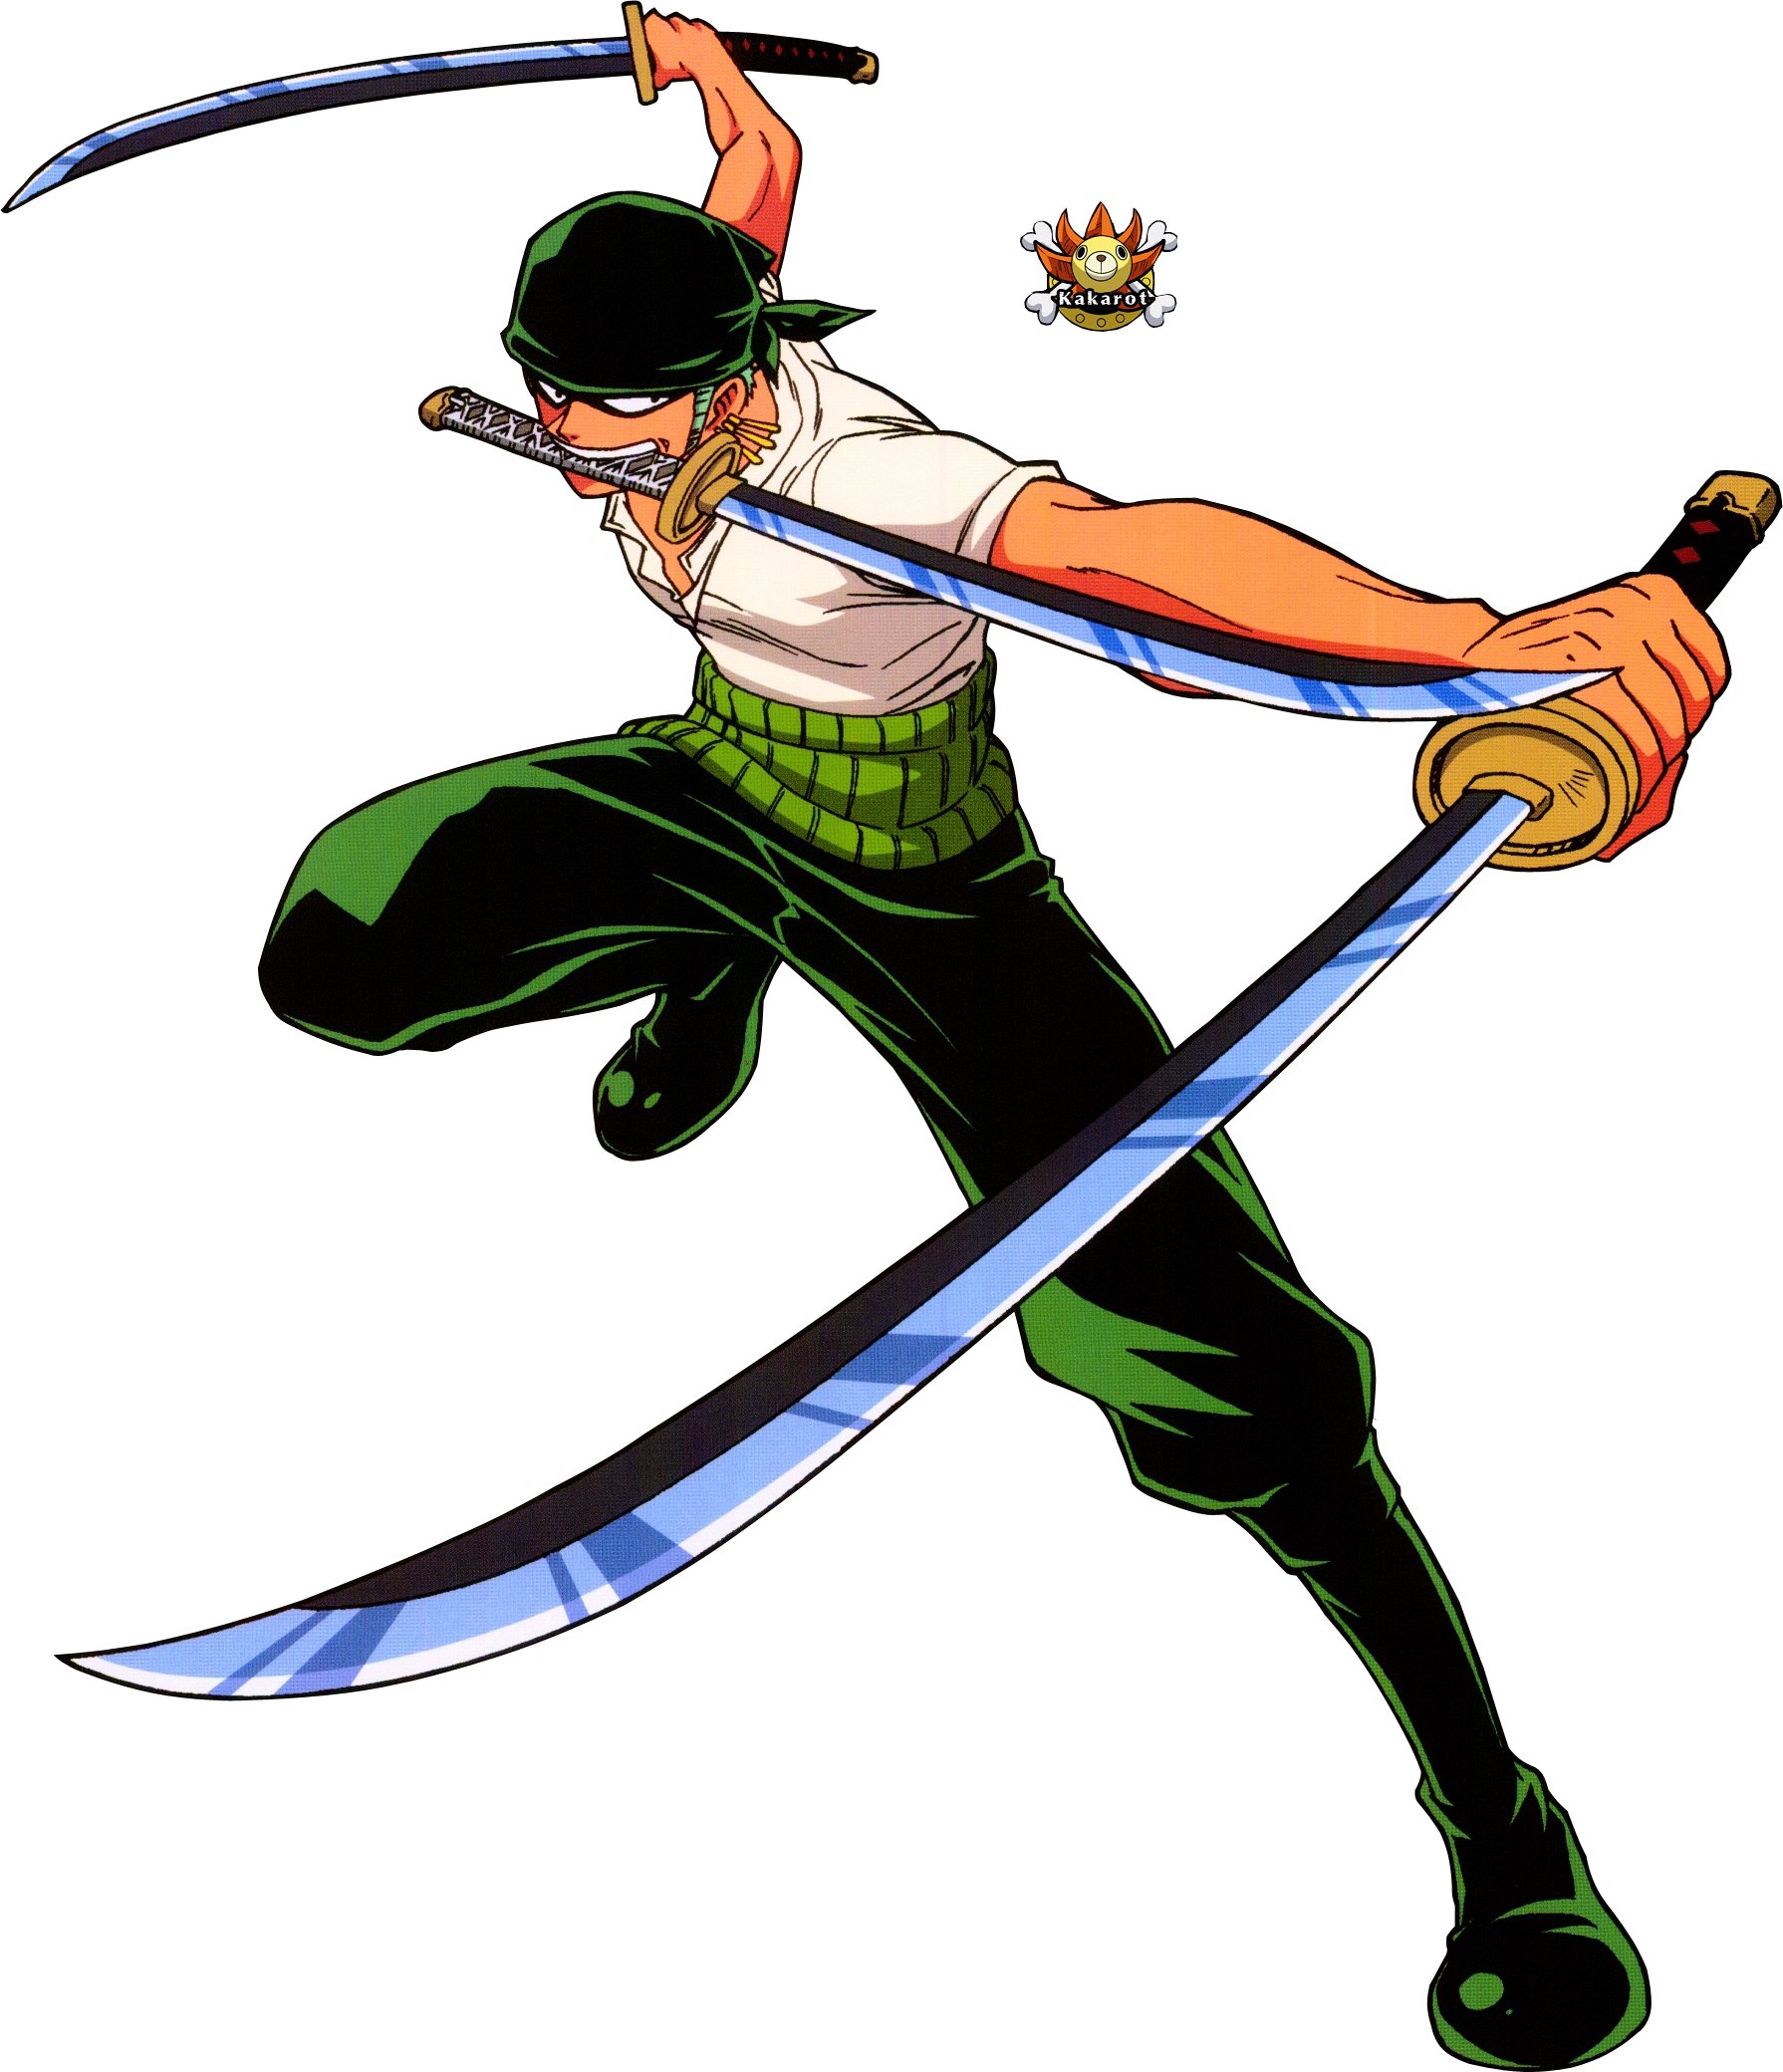 Free transparent zoro png images, page 1 